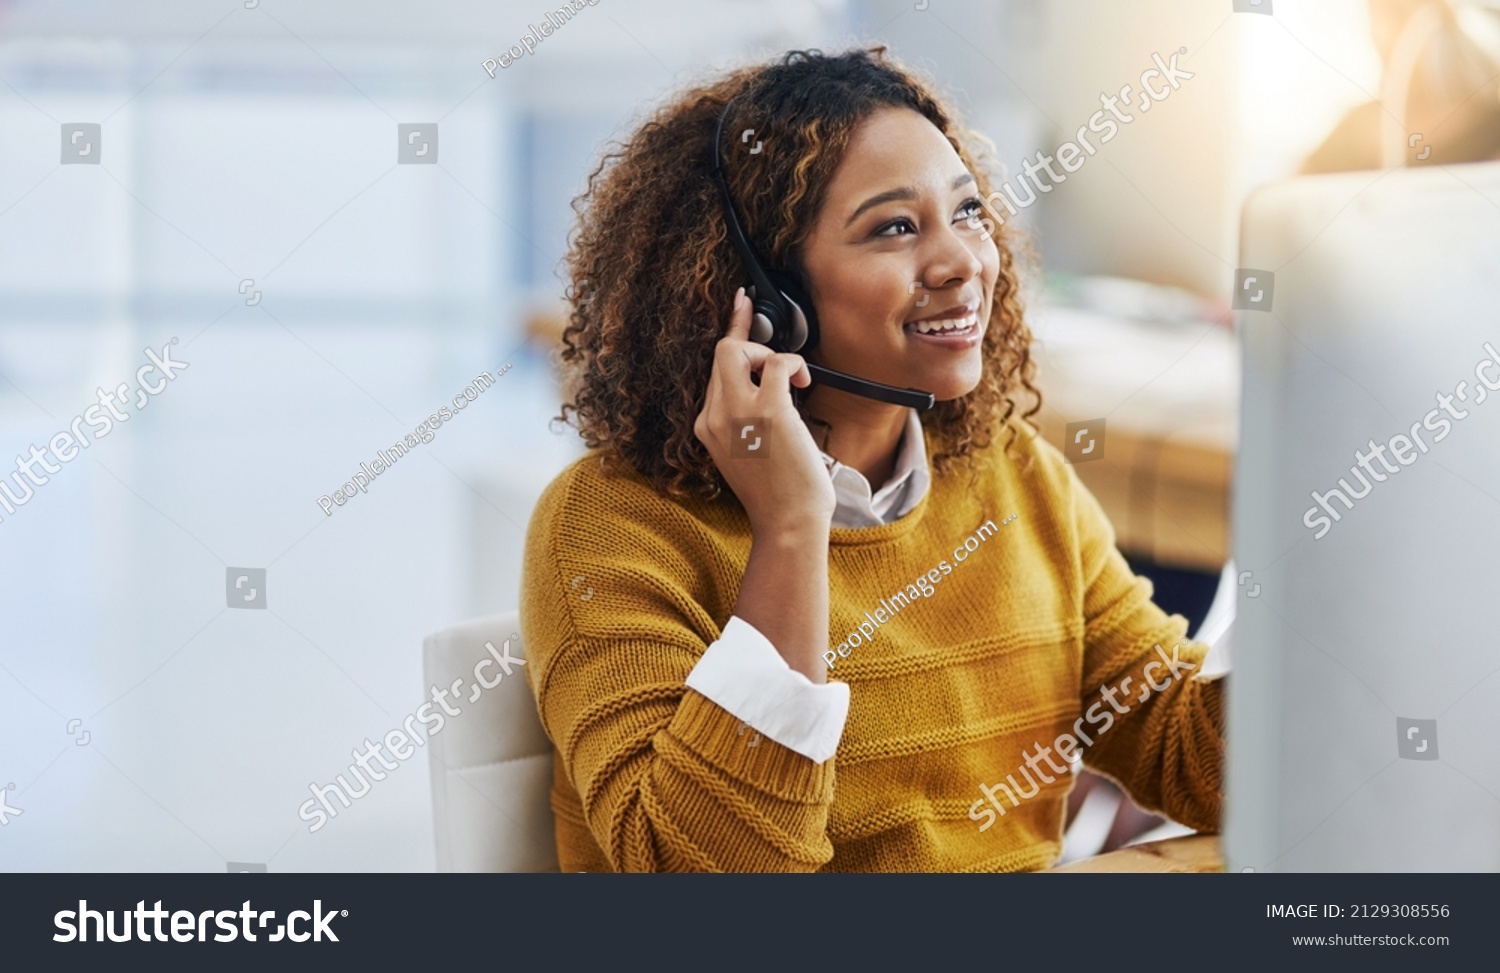 Her display of care in customers is great business. Shot of a female agent working in a call centre. #2129308556